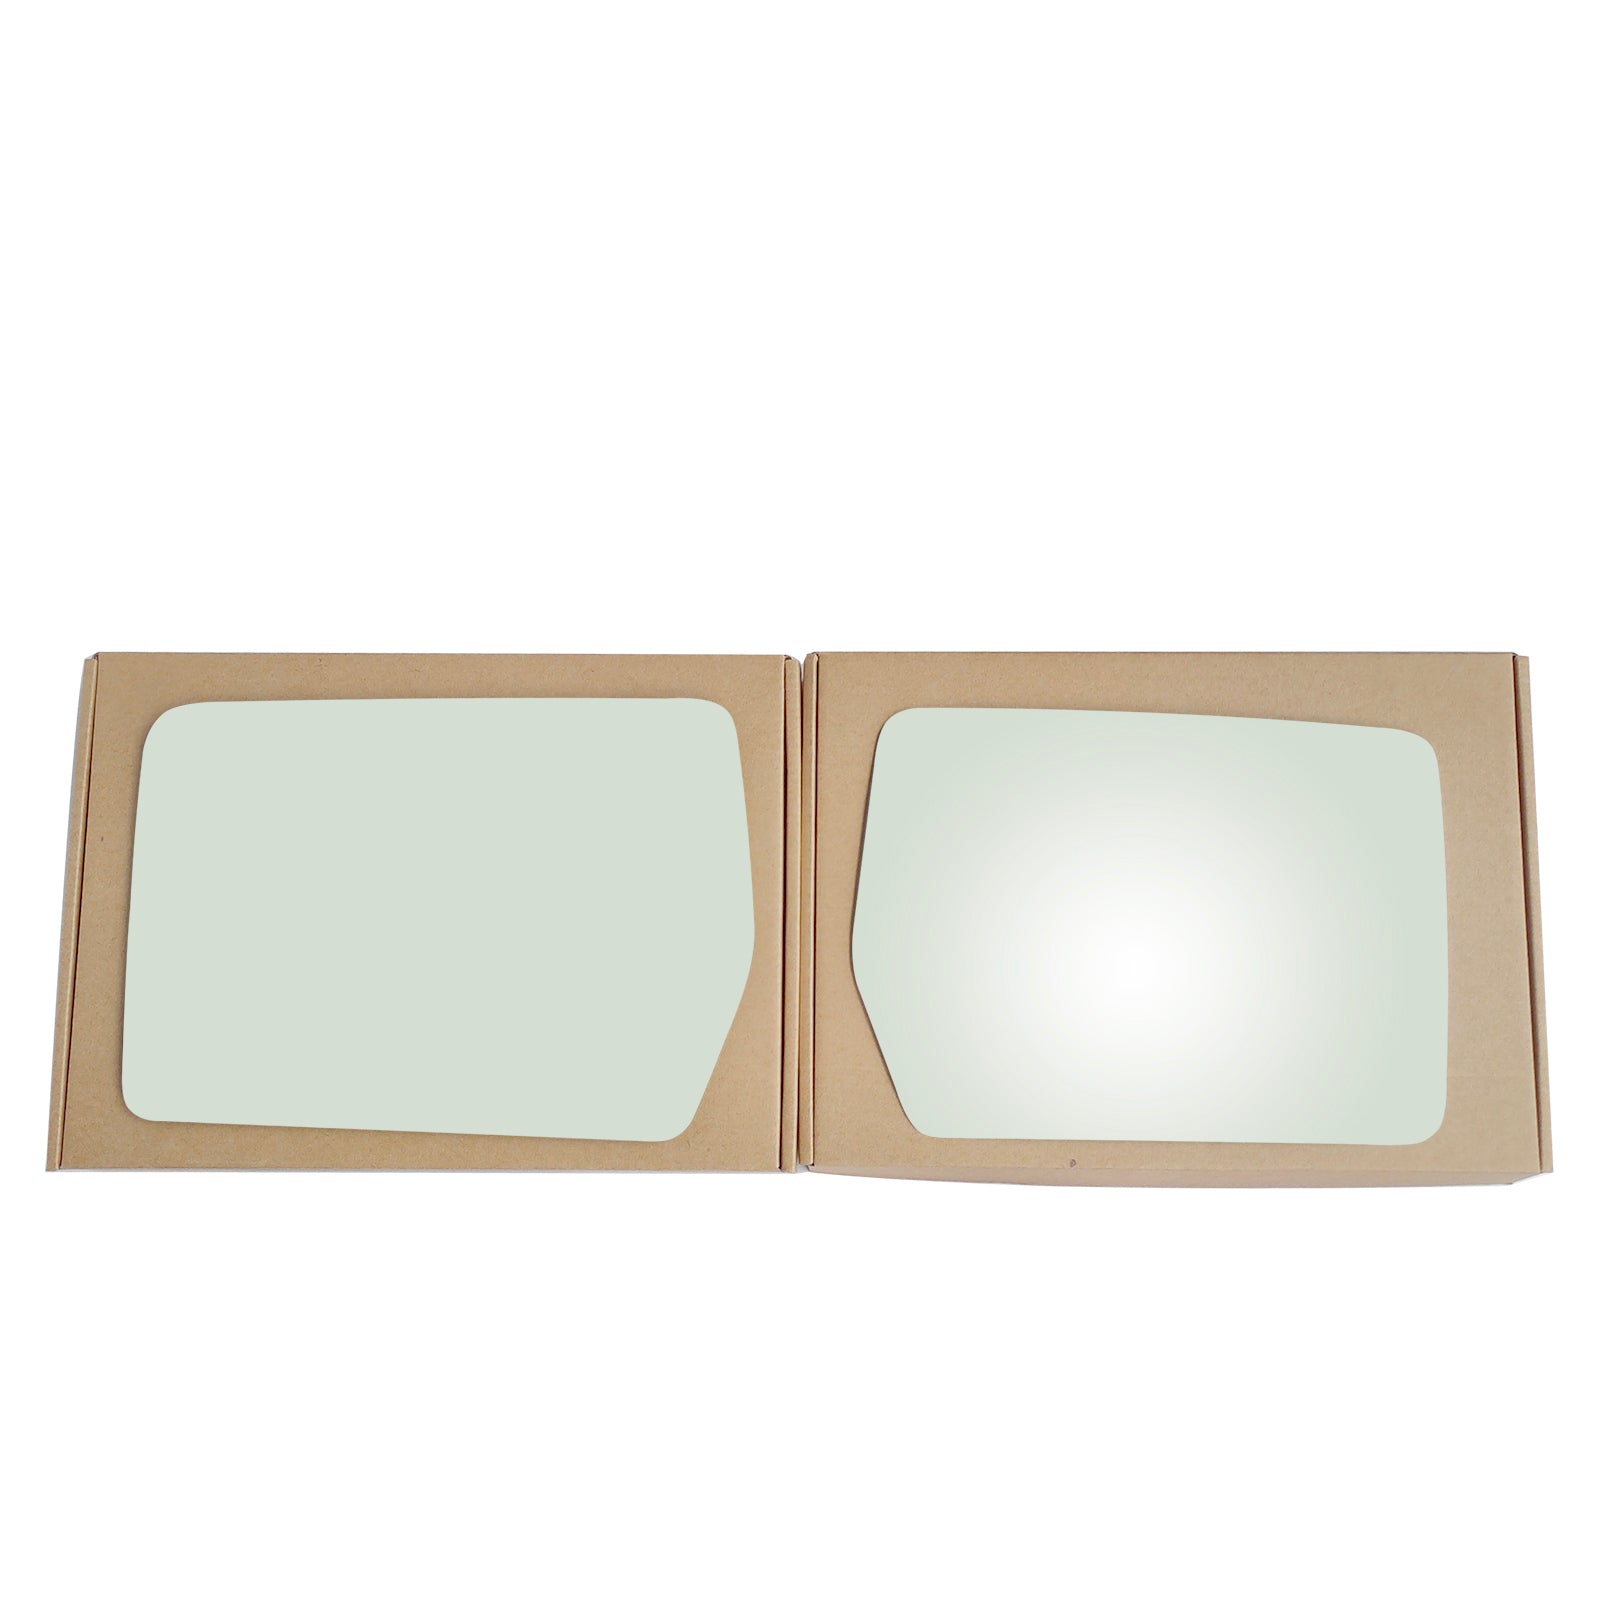 WLLW Mirror Glass Replacement for 2004-2008 Ford F150 Full Size Pickup Truck/2006-2008 Lincoln Mark lT, Driver Left Side LH/Passenger Right Side RH/The Both Sides Flat Convex M-0001